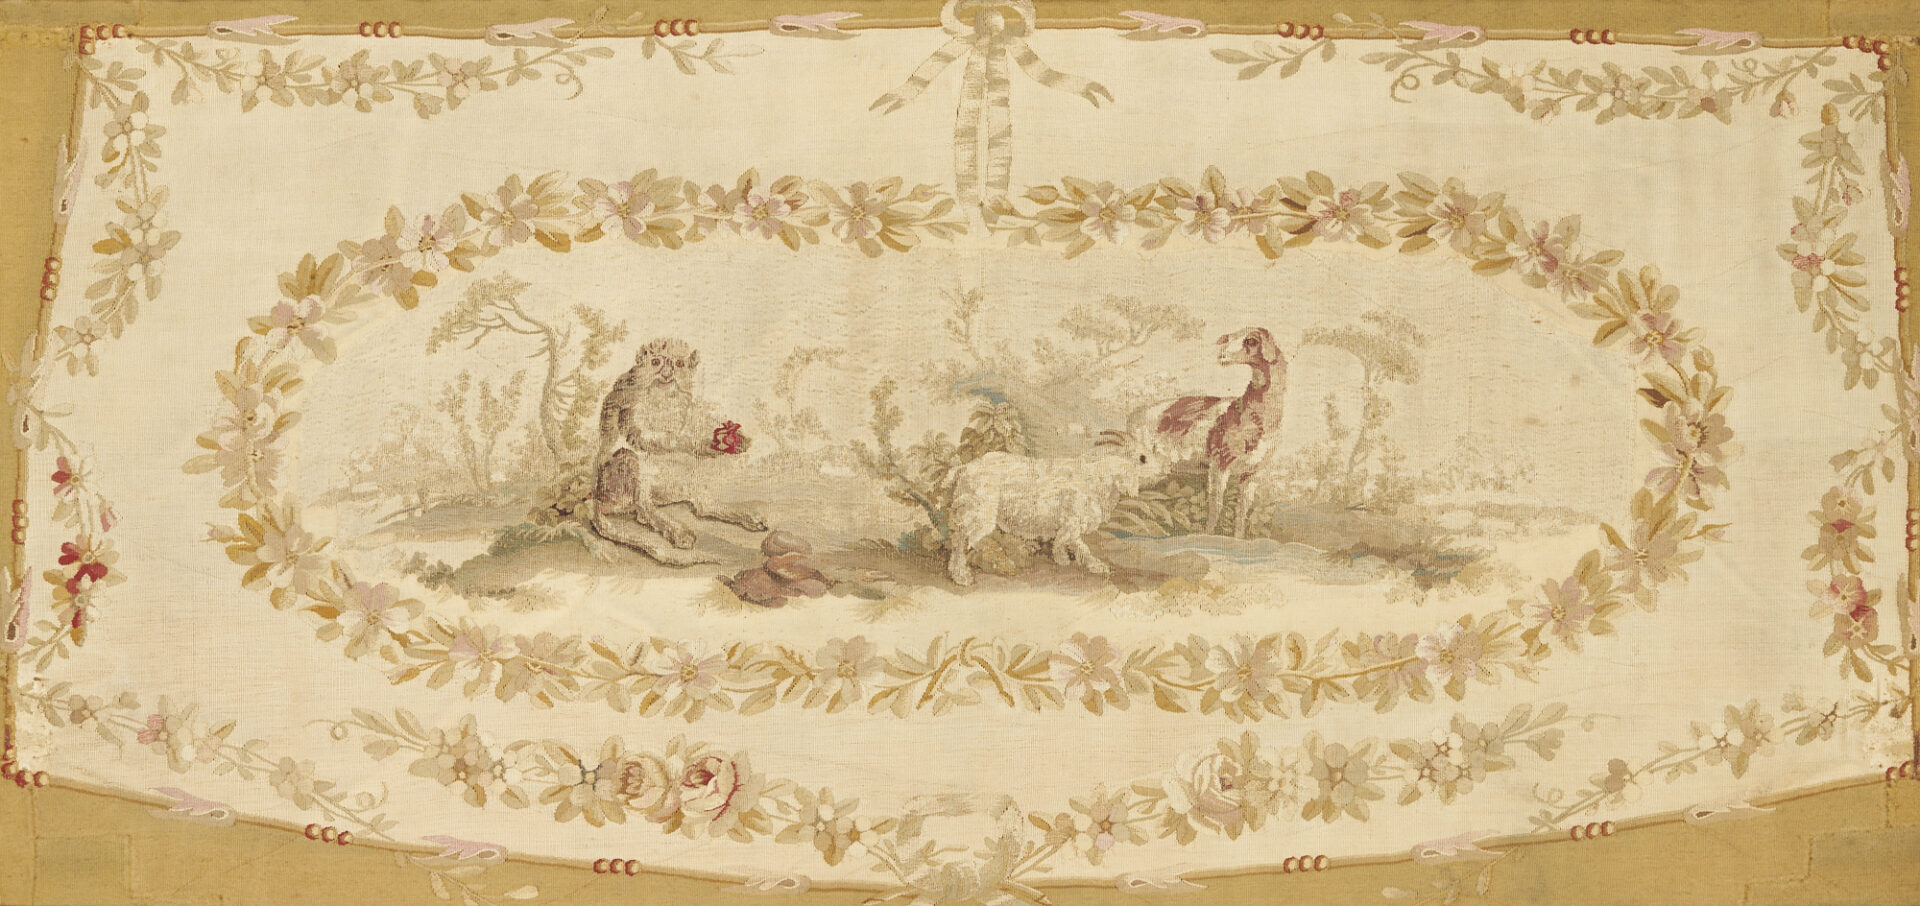 Lot 374: Framed Aubusson 18th c. Tapestry after J.B. Huet, Animals Parliament